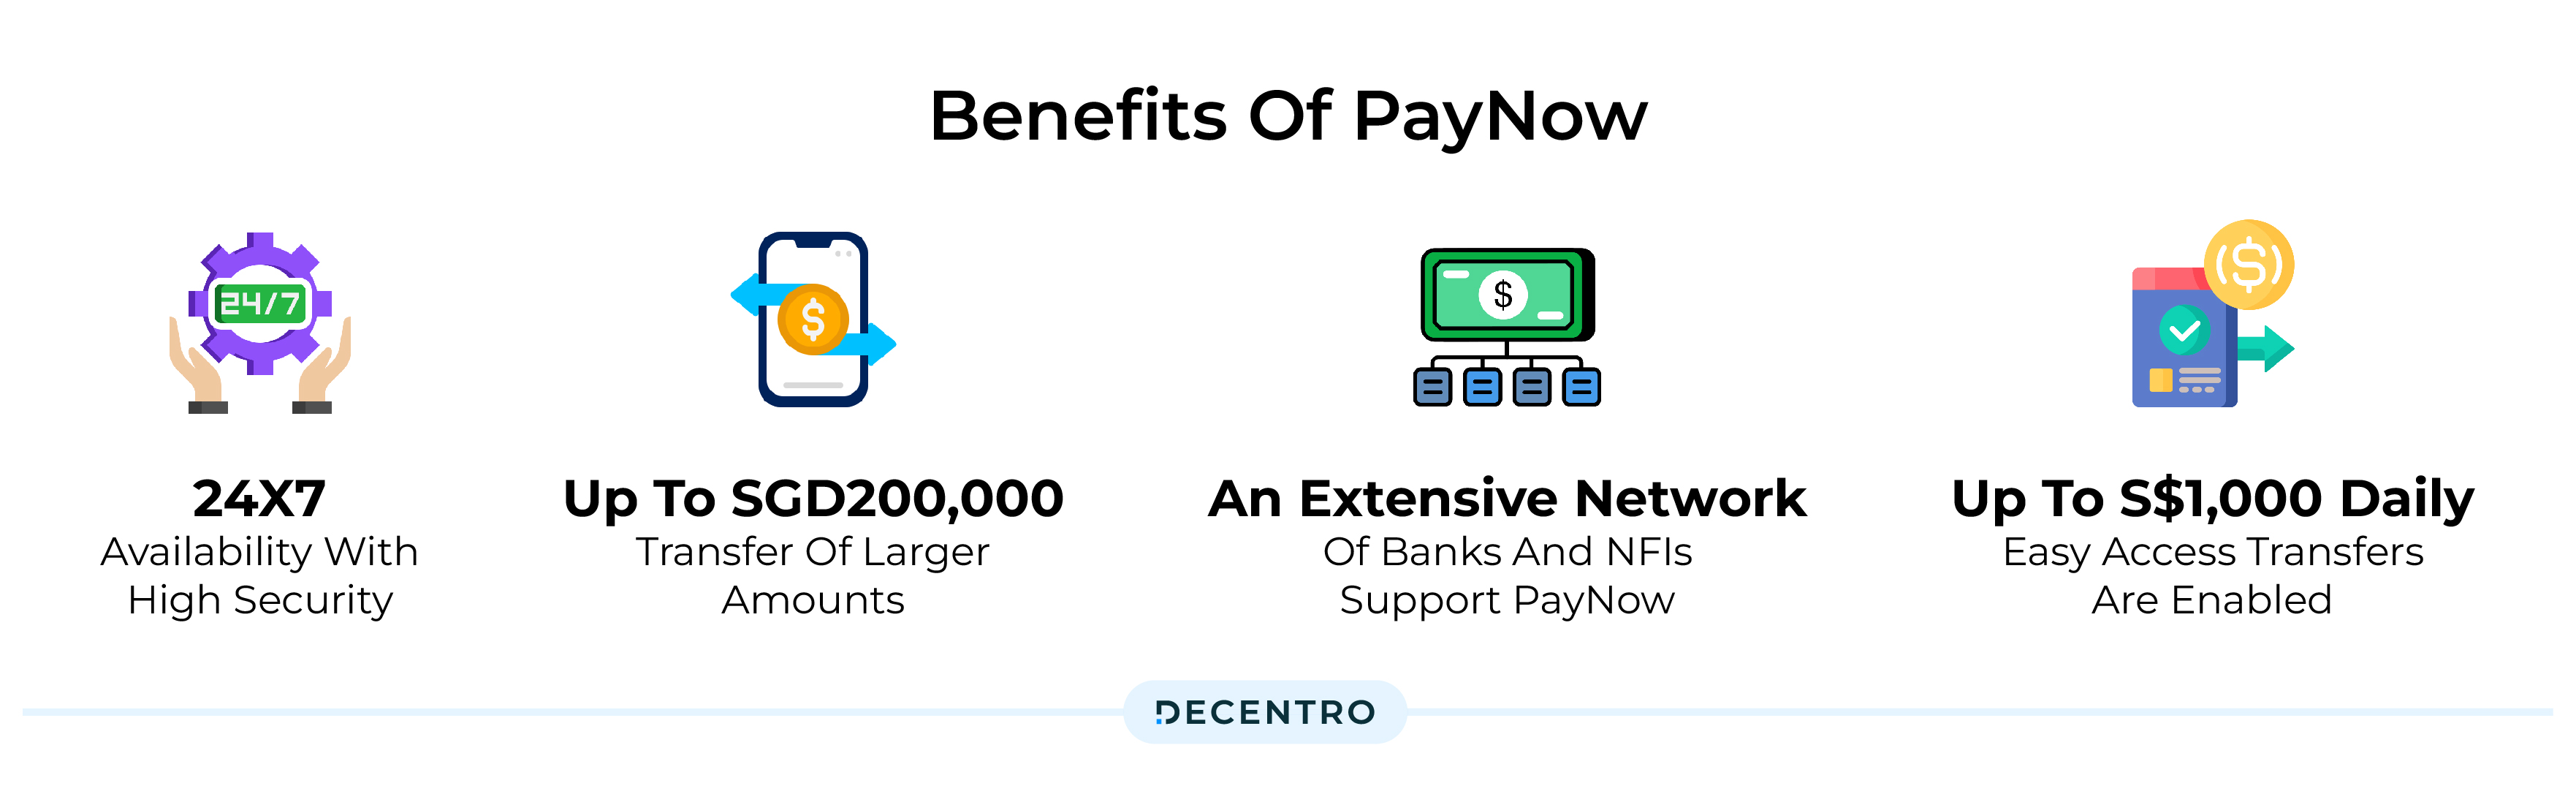 Benefits of PayNow